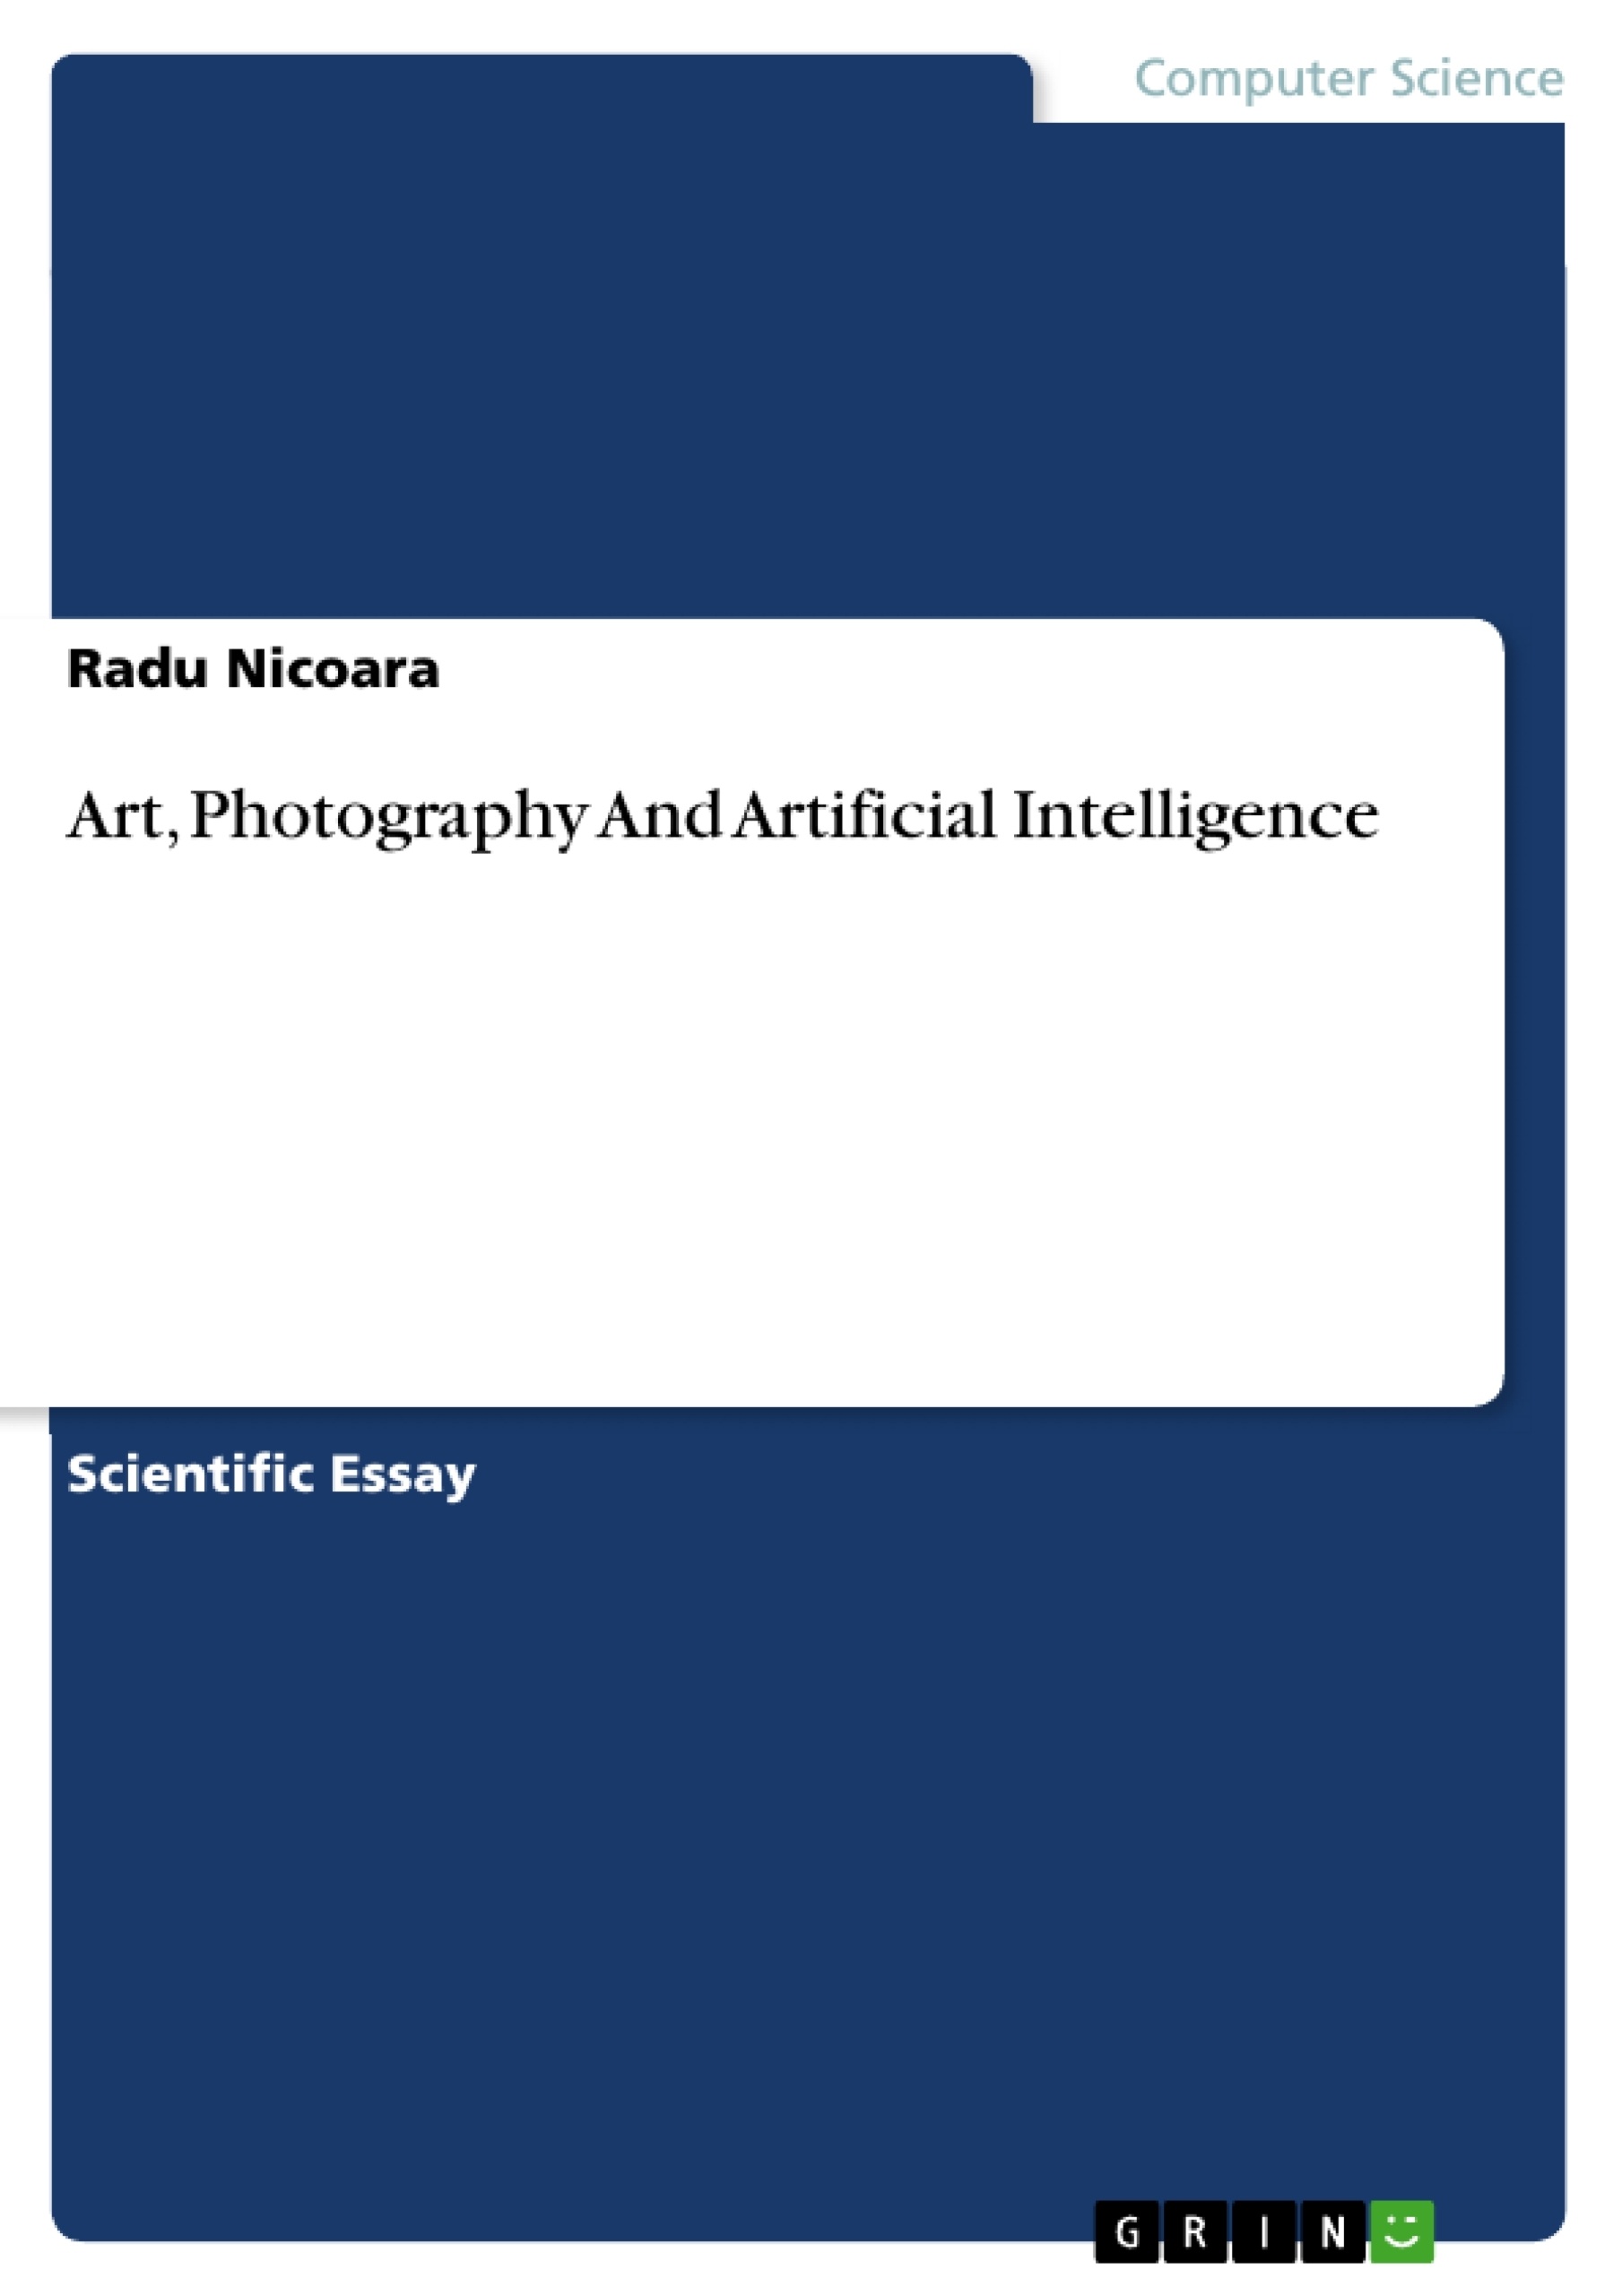 Titre: Art, Photography And Artificial Intelligence